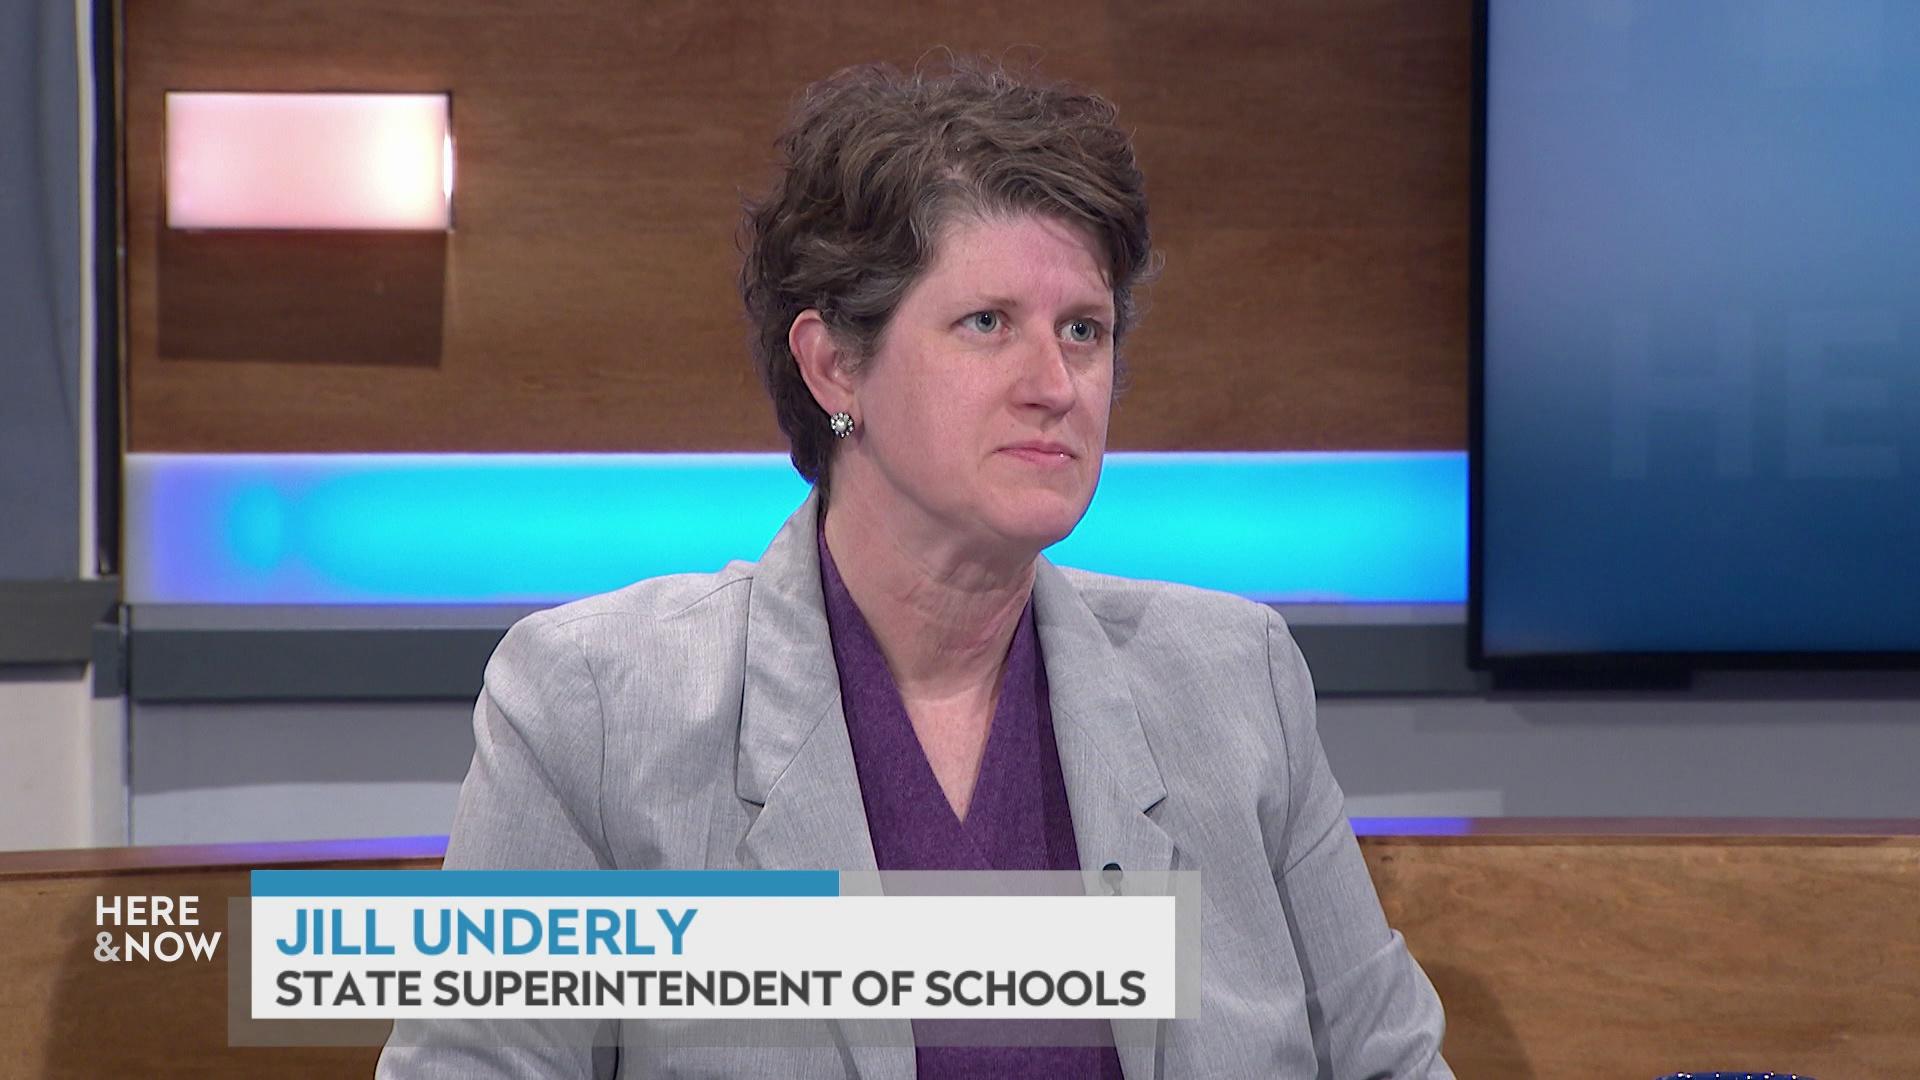 A still image shows Jill Underly seated at the 'Here & Now' set featuring wood paneling, with a graphic at bottom reading 'Jill Underly' and 'State Superintendent of Schools.'